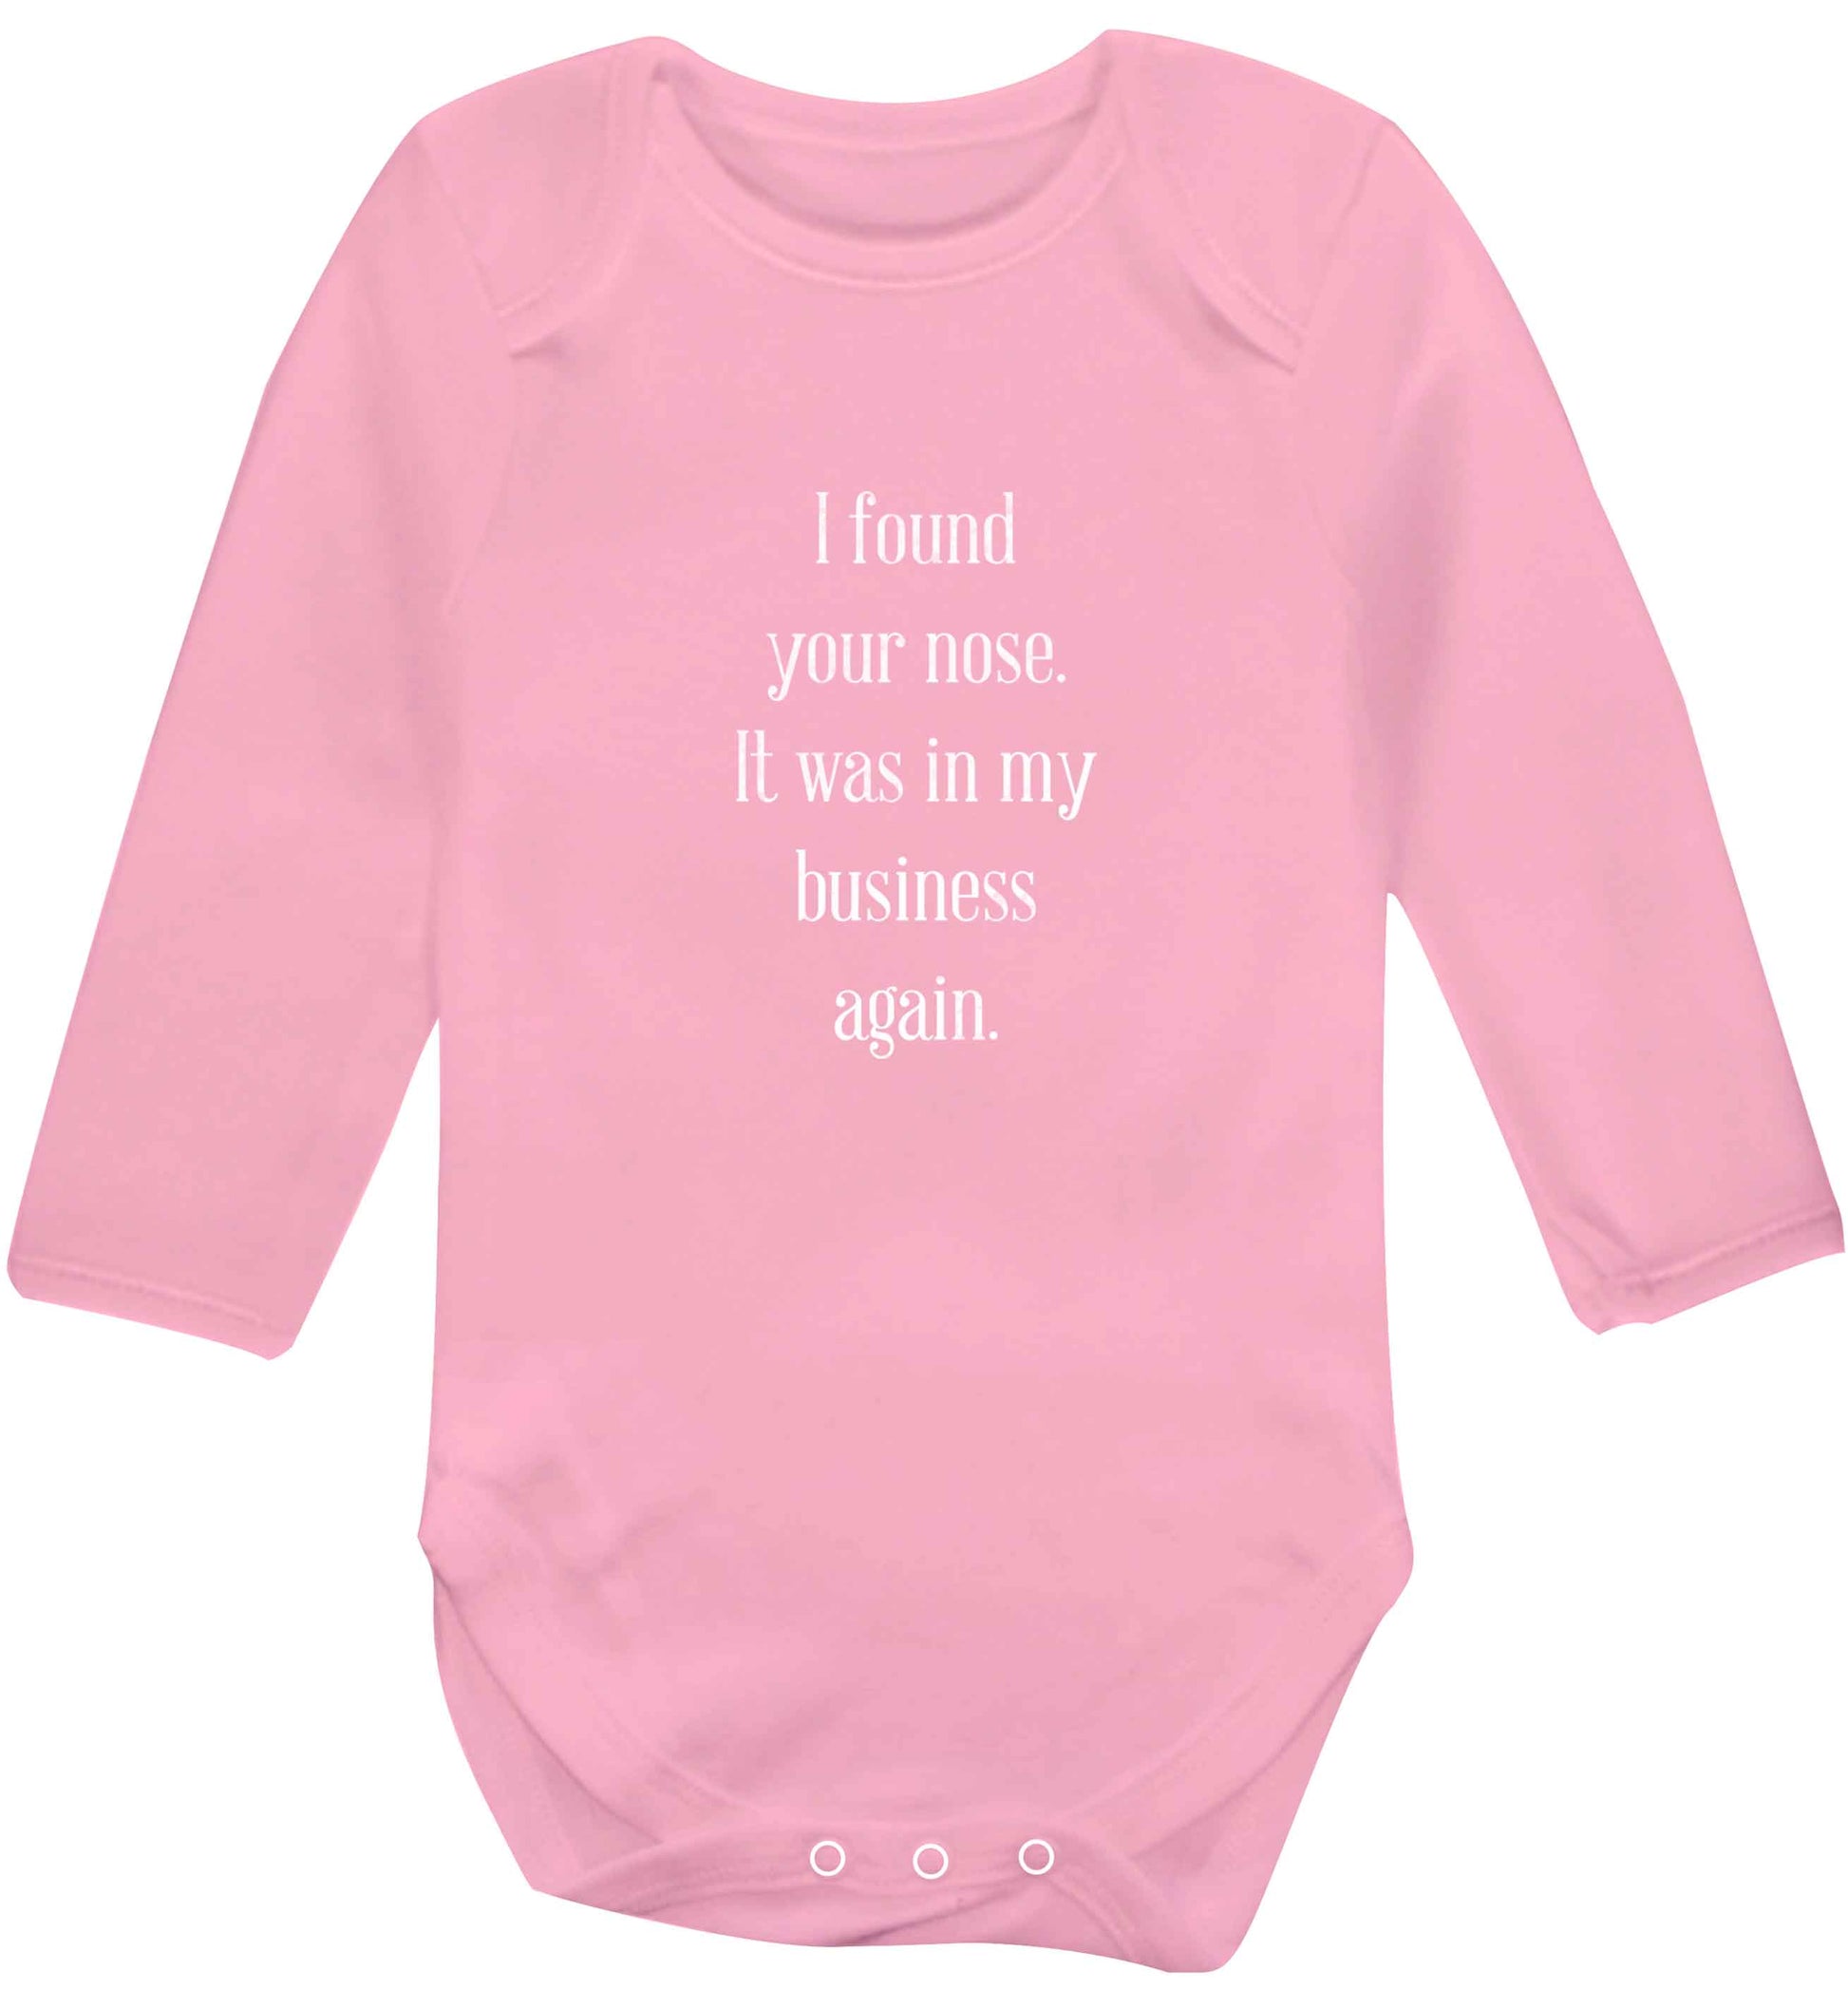 I found your nose it was in my business again baby vest long sleeved pale pink 6-12 months